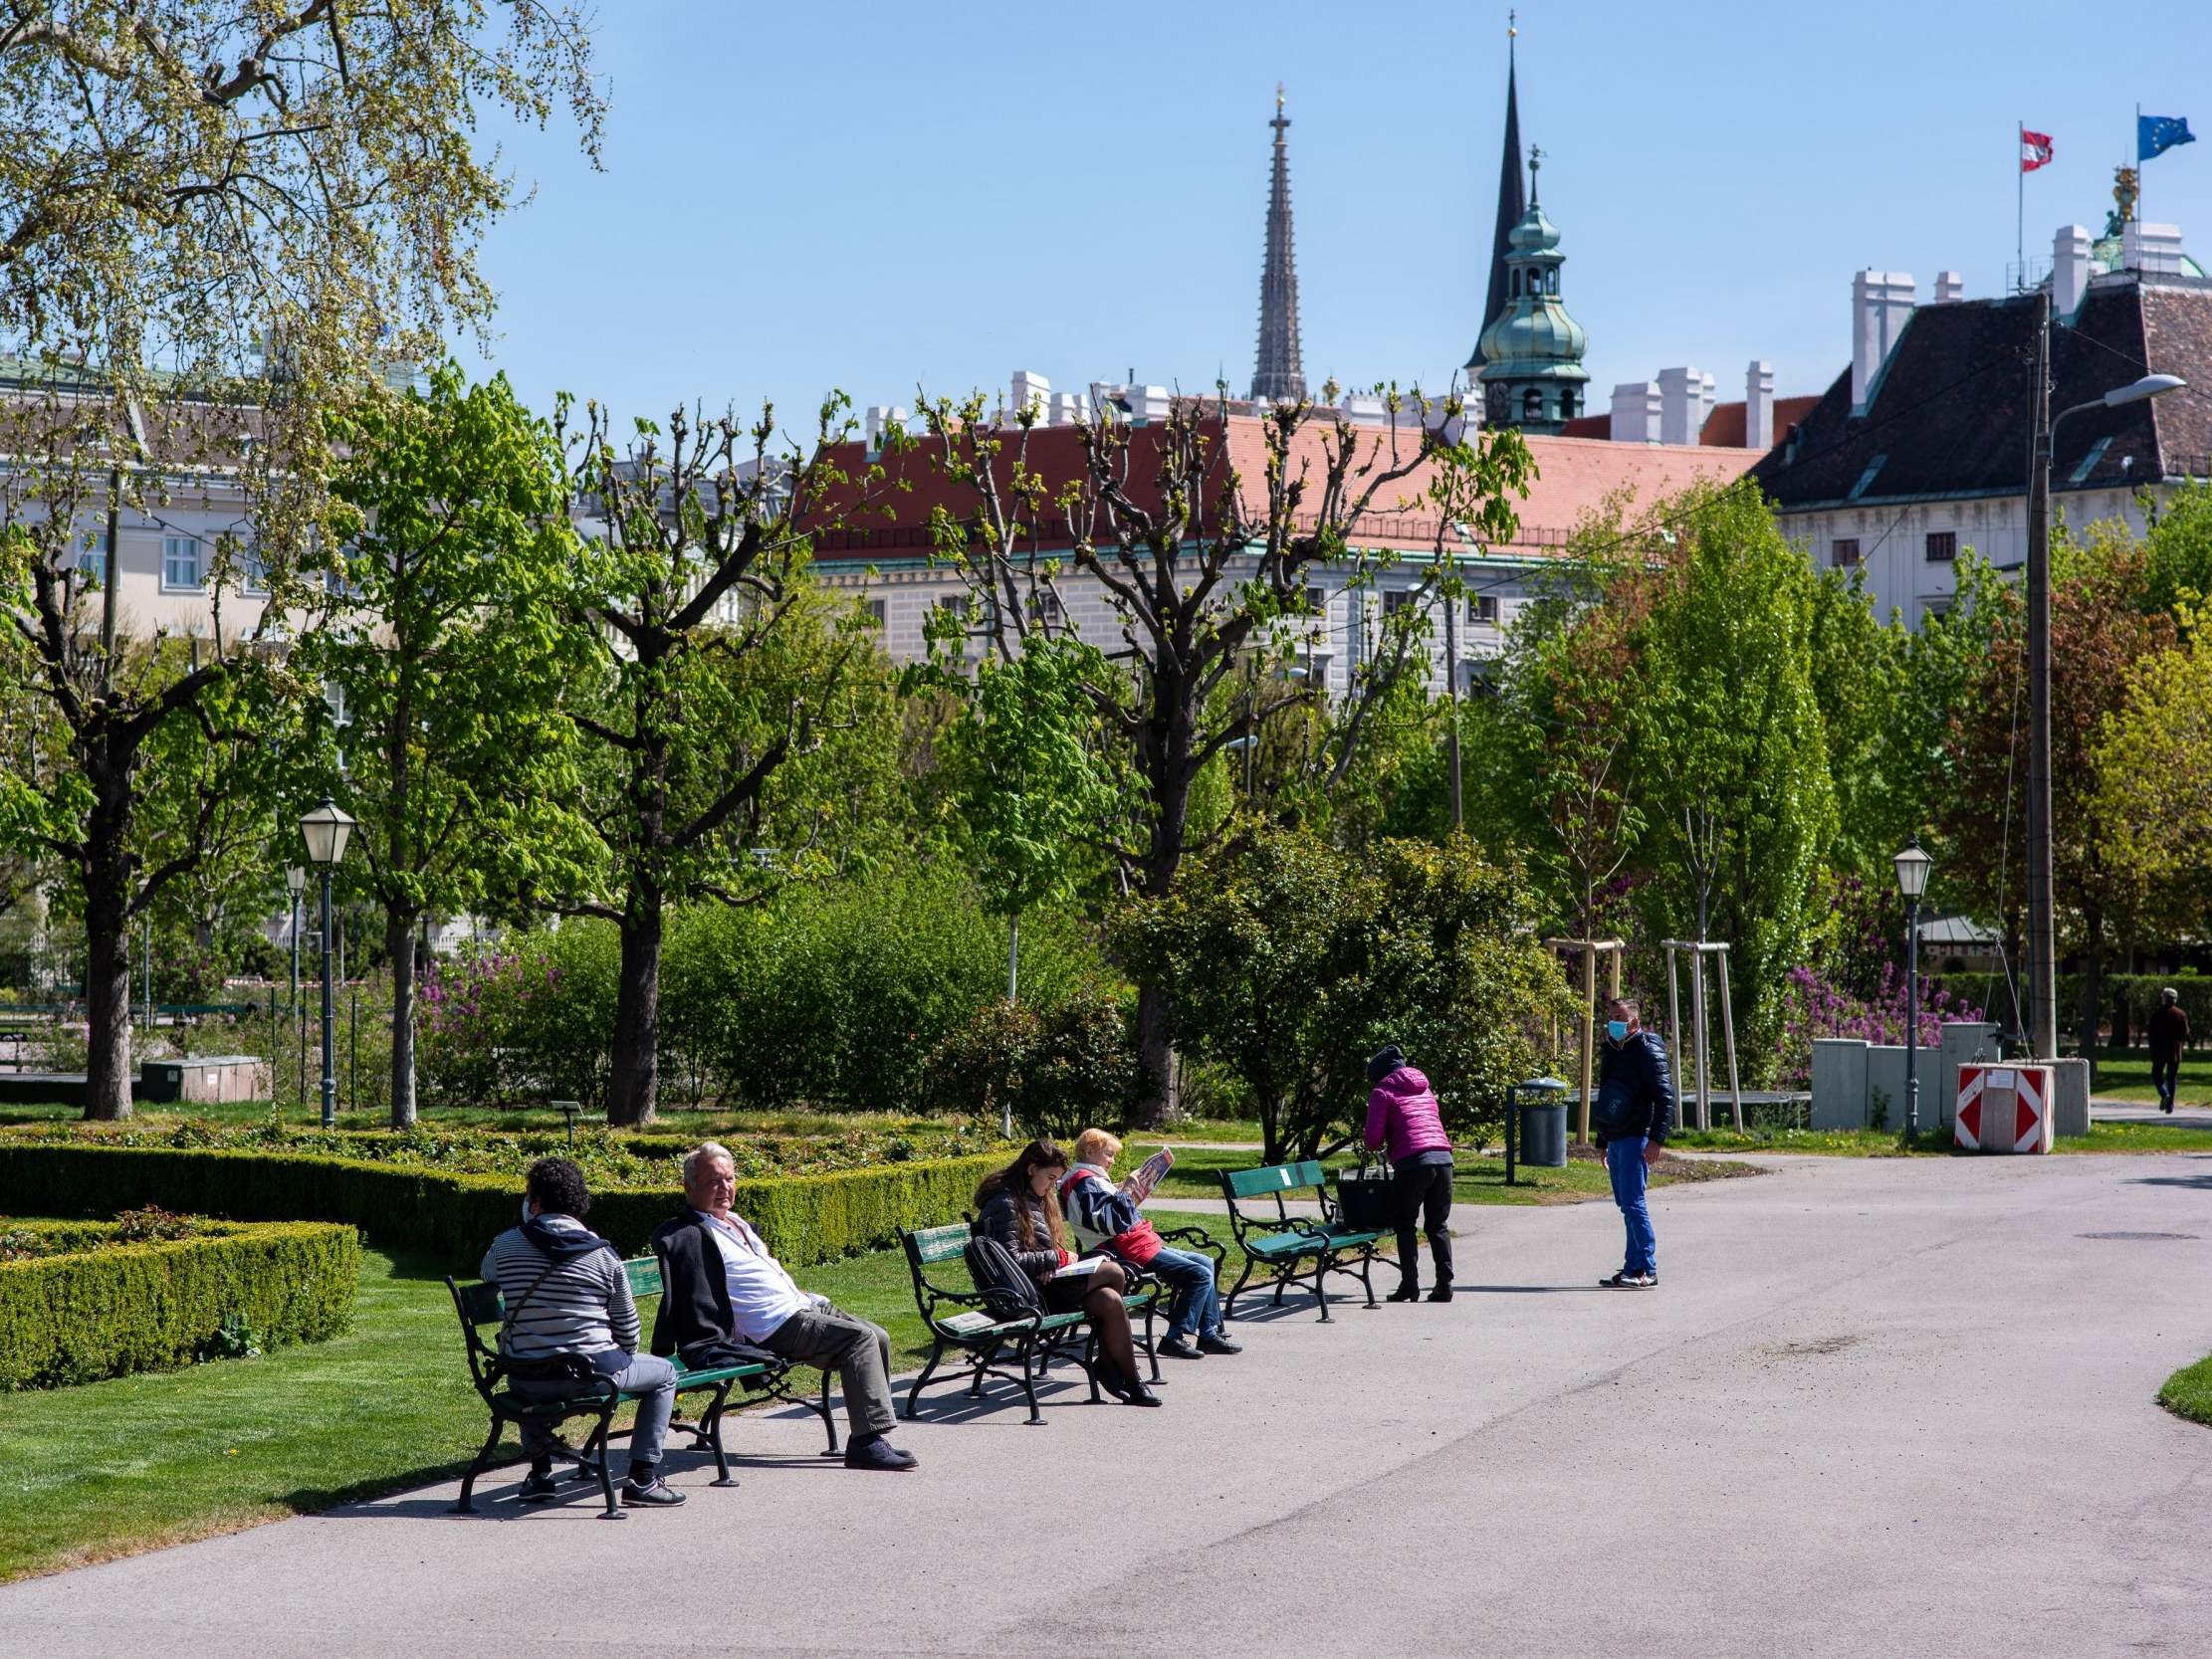 People enjoy the sun in Vienna’s reopened Volksgarten on Wednesday, following an easing of restrictions during the coronavirus crisis